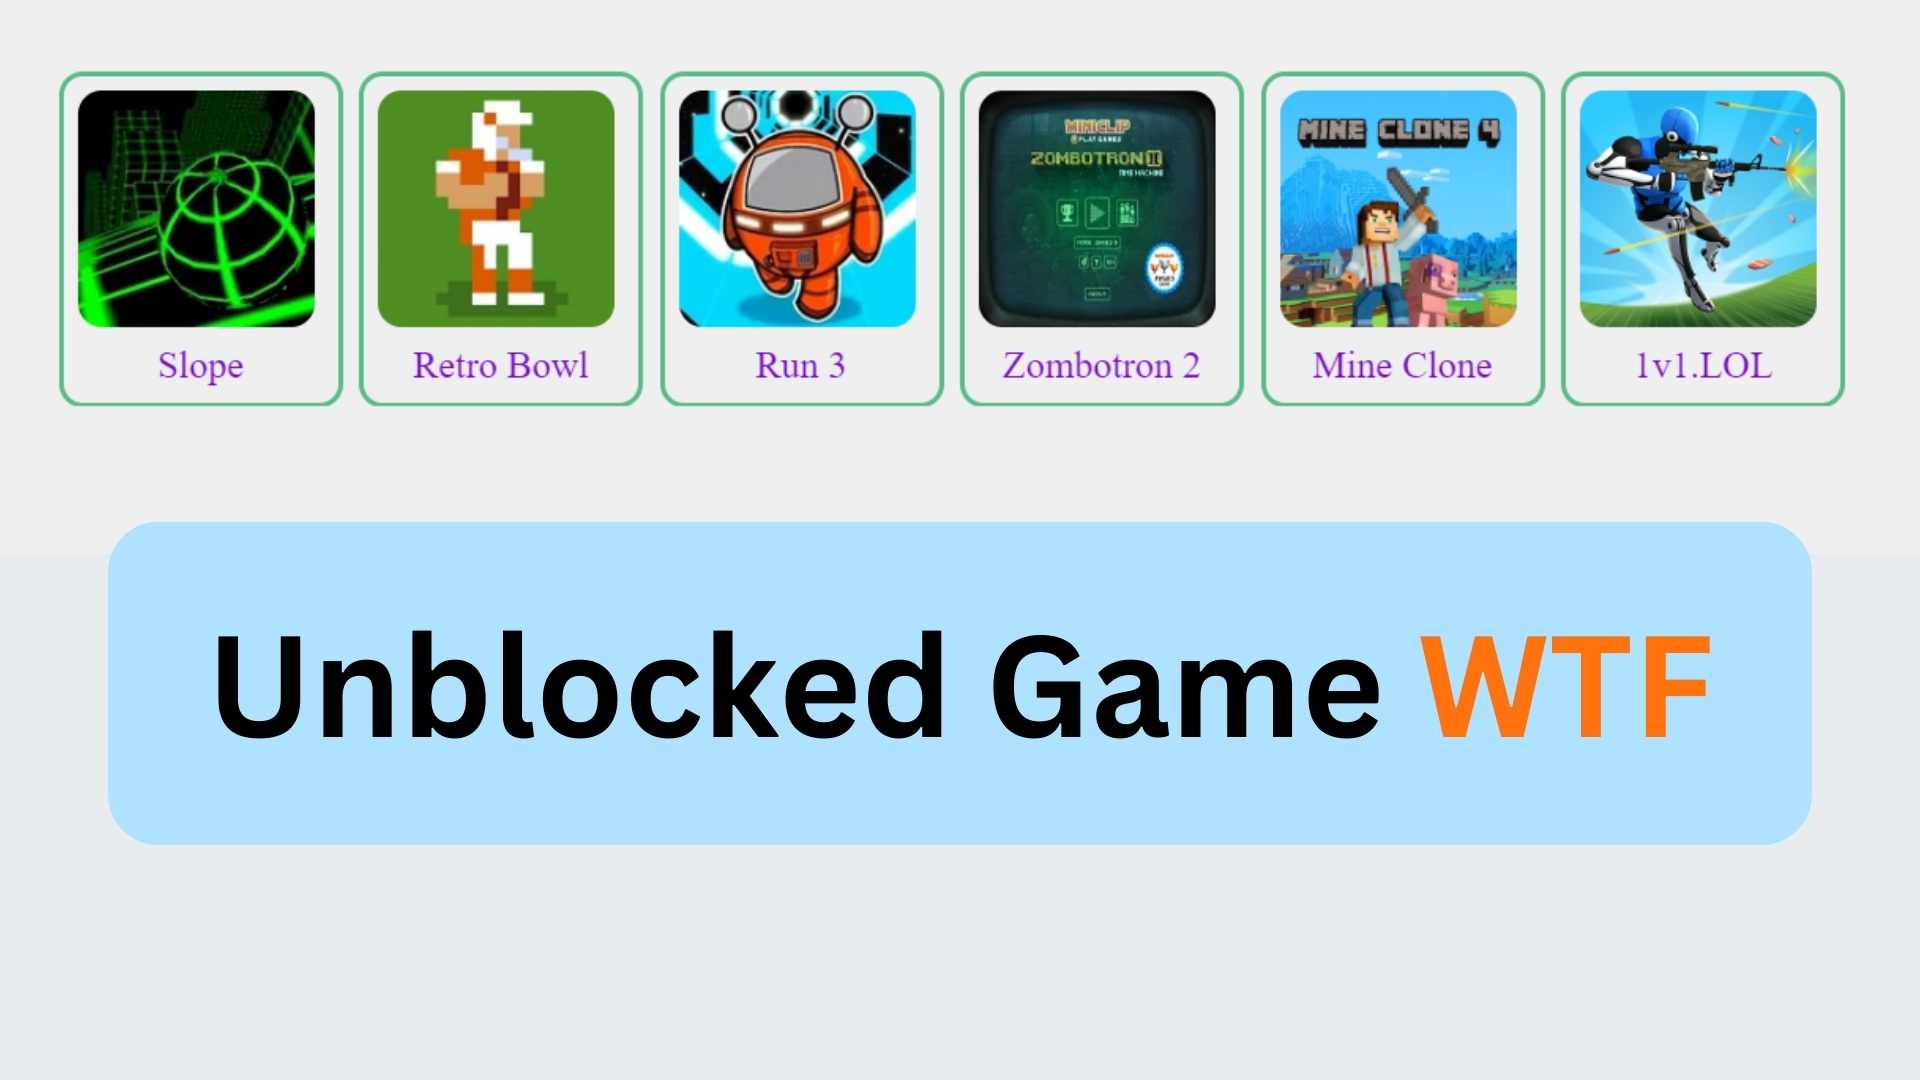 Unblocked Games WTF, All you need to know - 247primenews